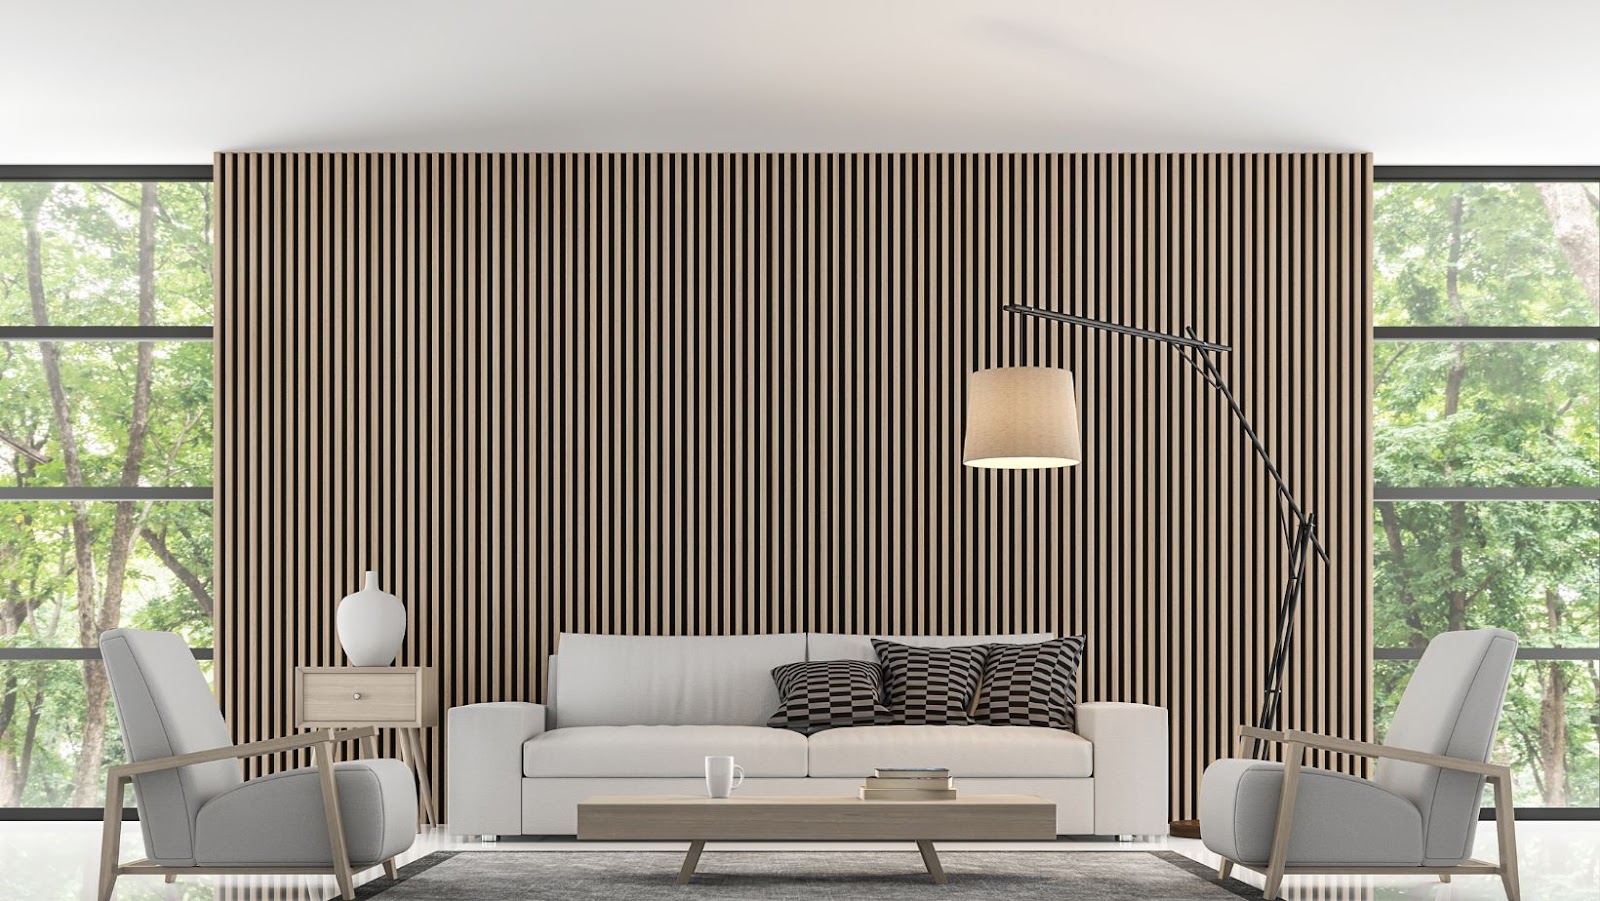 10 Tips For Choosing The Right Metal Slatwall To Fit Your Home